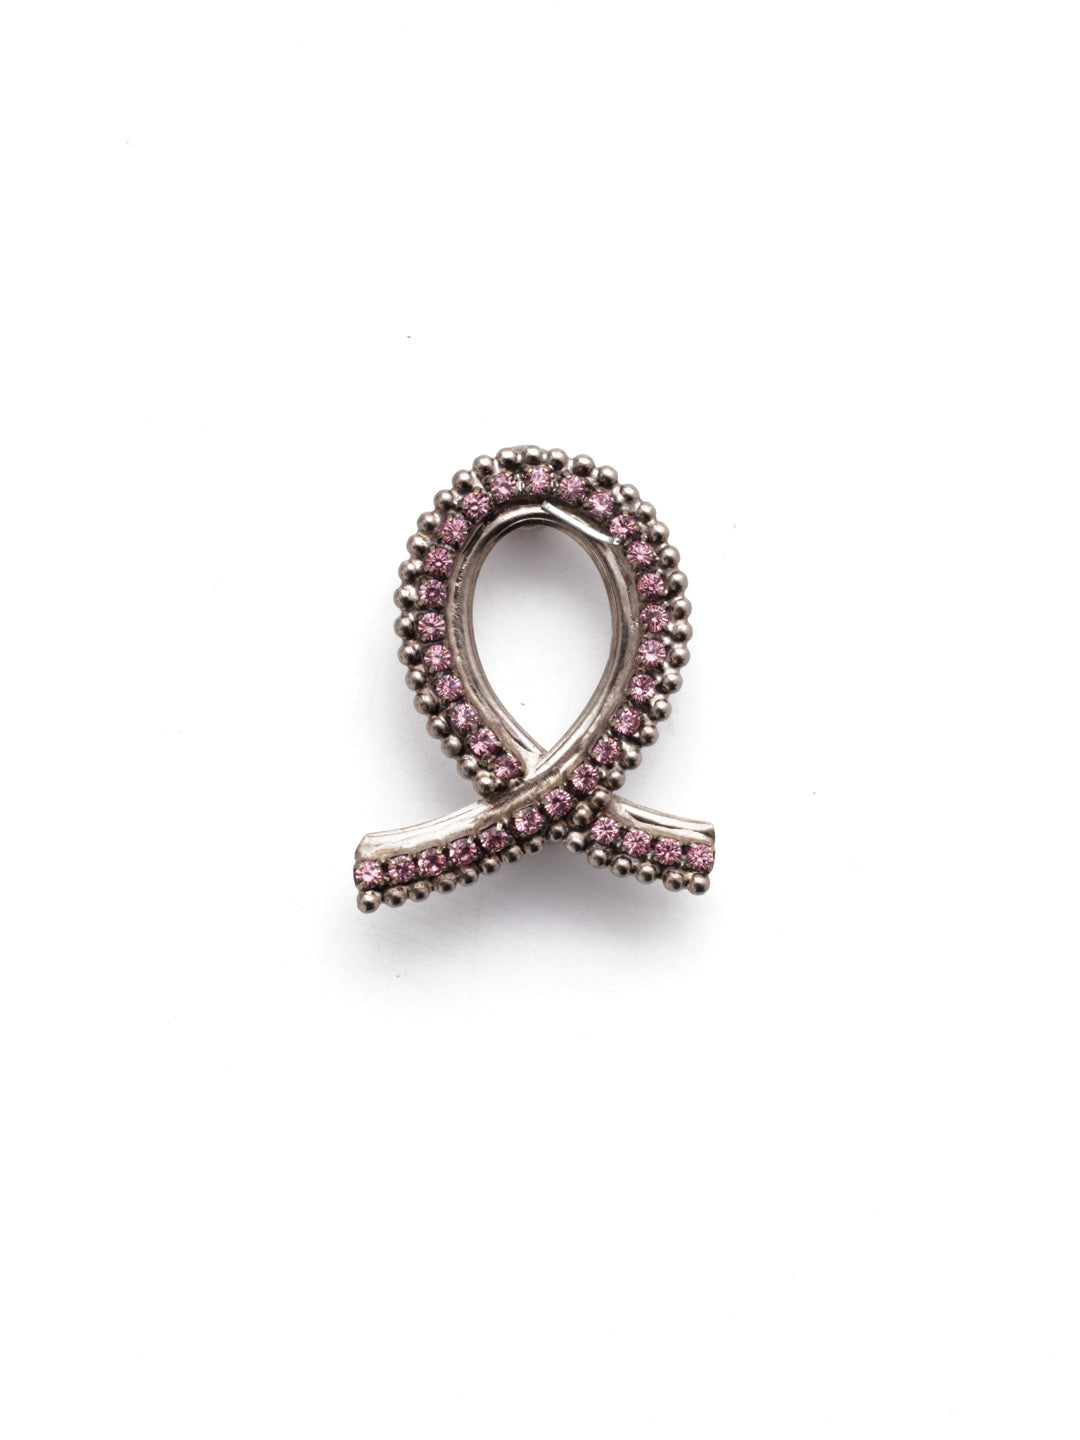 Breast Cancer Ribbon Magnetic Charm - CHM13ASPIN - <p>Our Magnetic charm is designed with both form and function in mind. Dual magnet attachment for easy attach and remove. Brilliantly adorned with crystals to give you that authentic style you're looking for. From Sorrelli's Pink Passion collection in our Antique Silver-tone finish.</p>